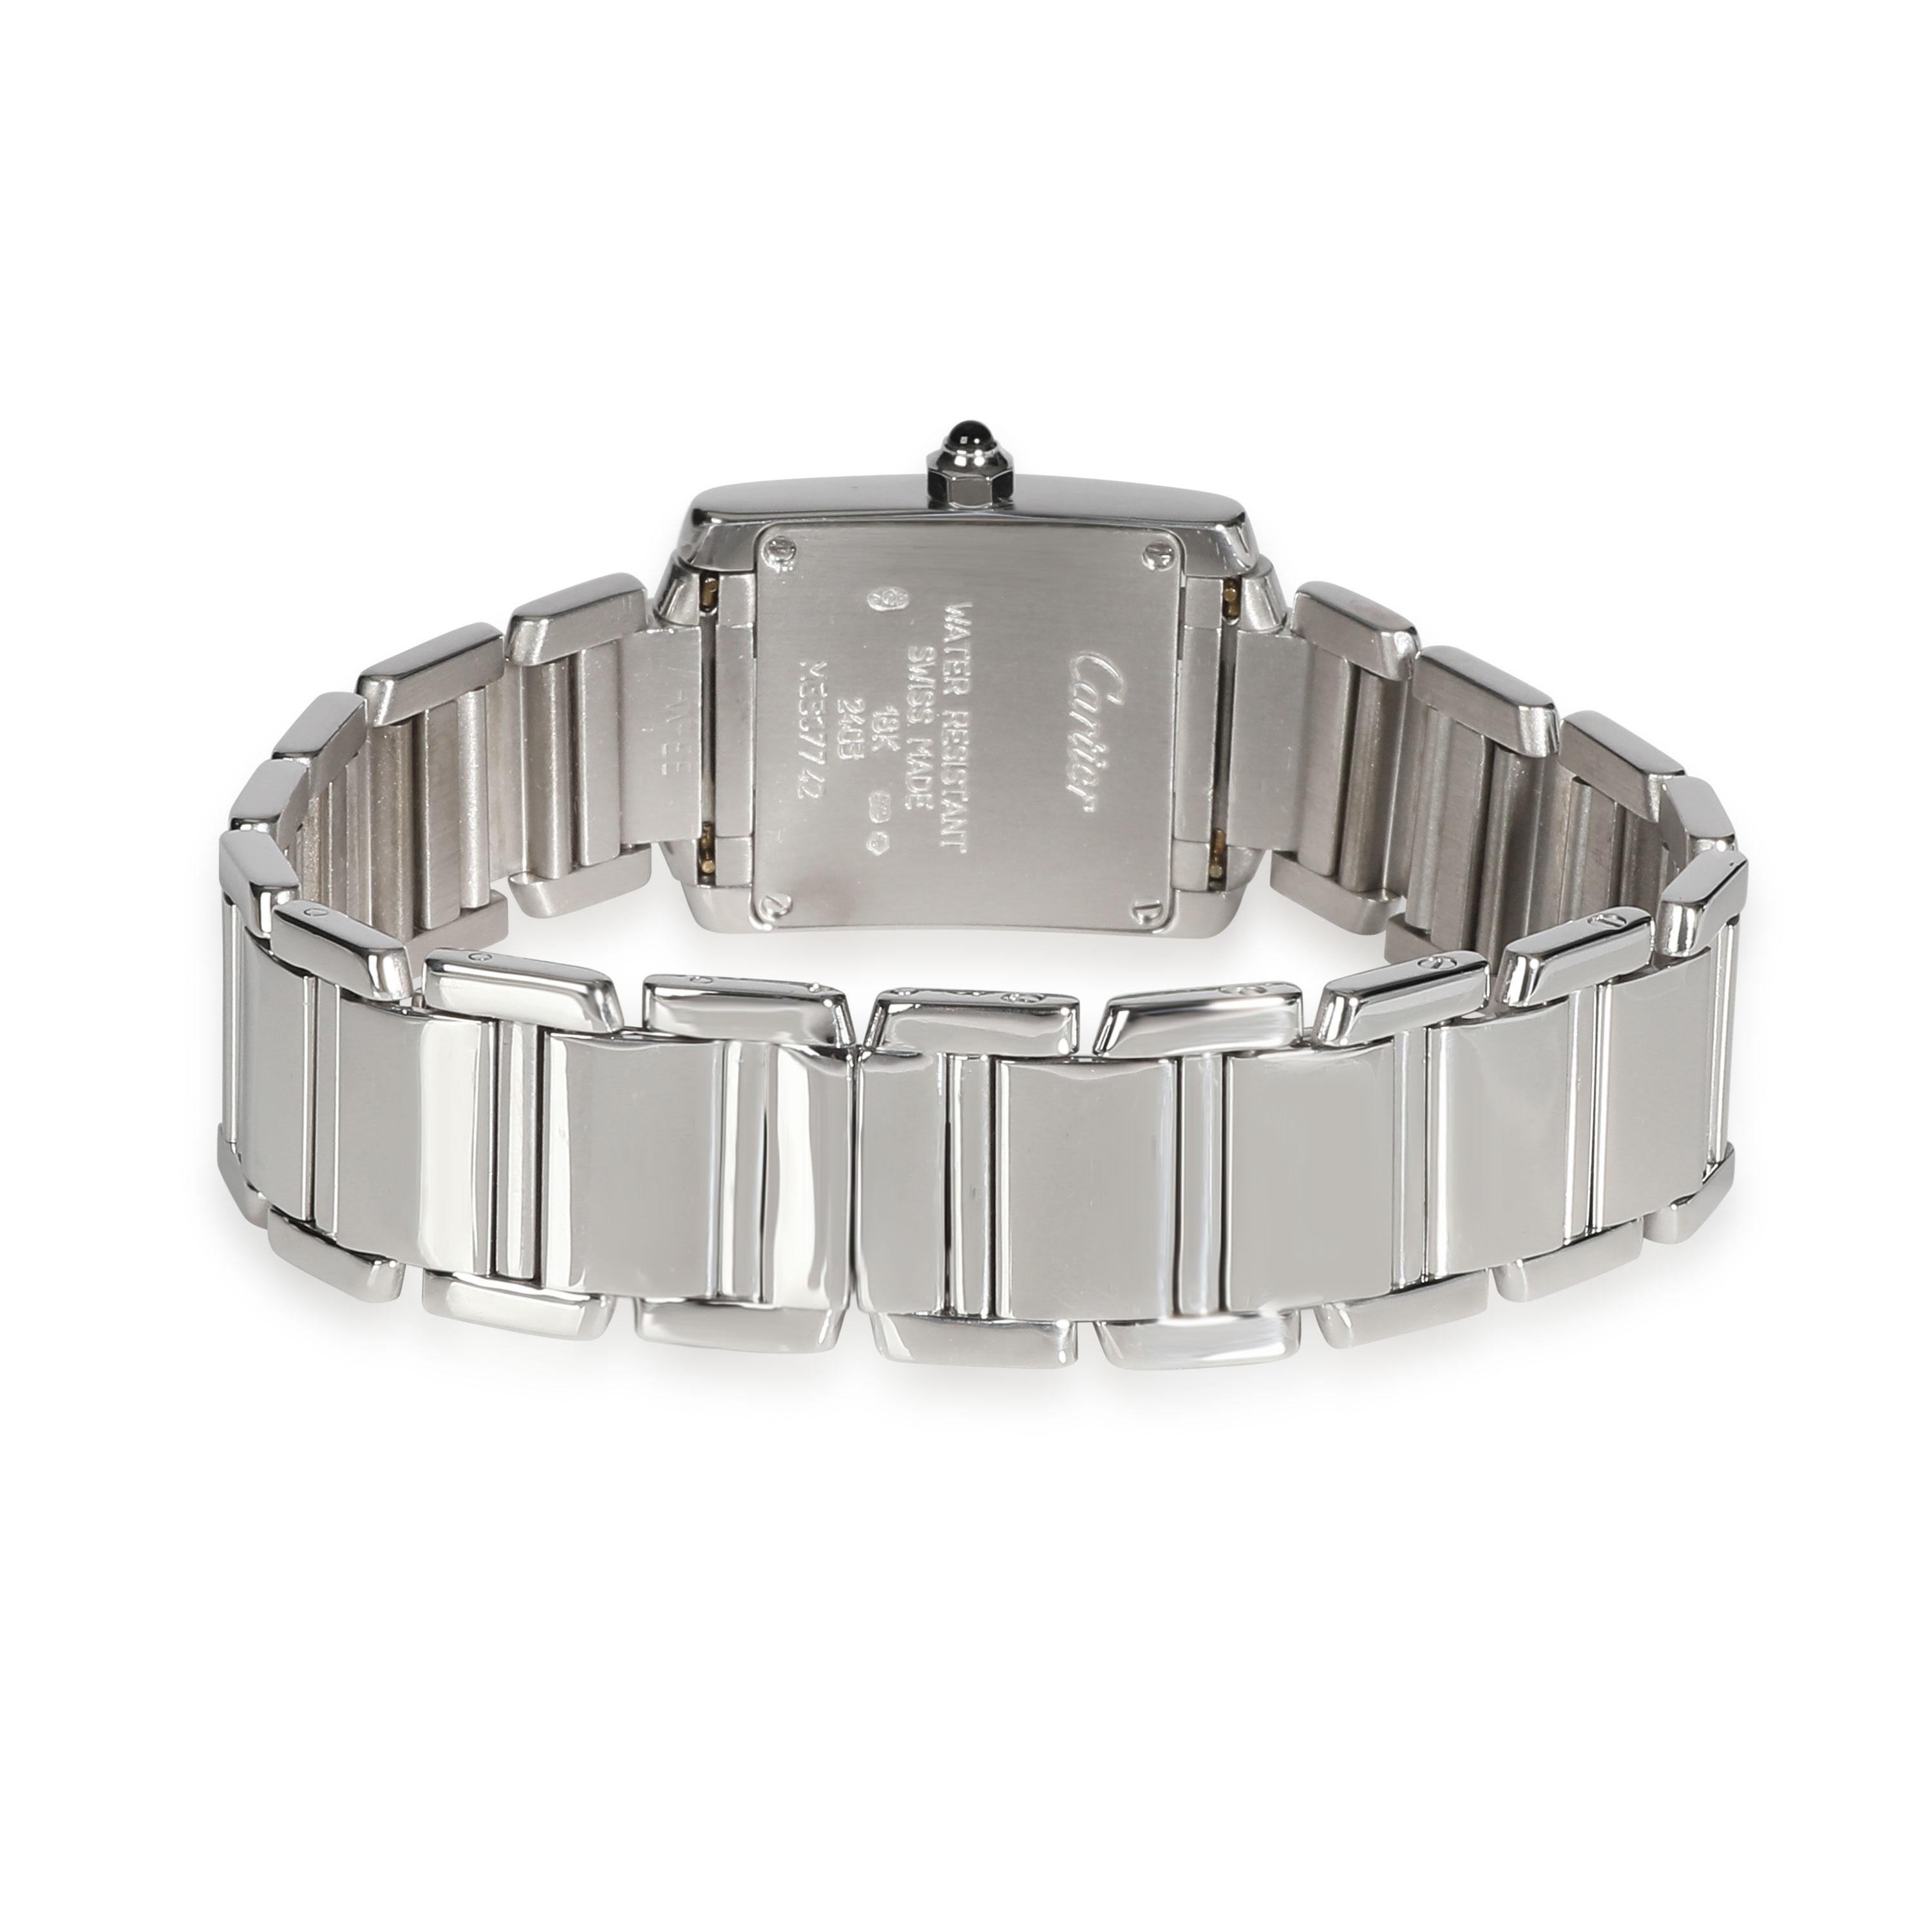 Cartier Tank Francaise W50012S3 Women's Watch in 18kt White Gold

SKU: 108677

PRIMARY DETAILS
Brand:  Cartier
Model: Tank Francaise
Country of Origin: Switzerland
Movement Type: Quartz: Battery
Year Manufactured: 
Year of Manufacture: